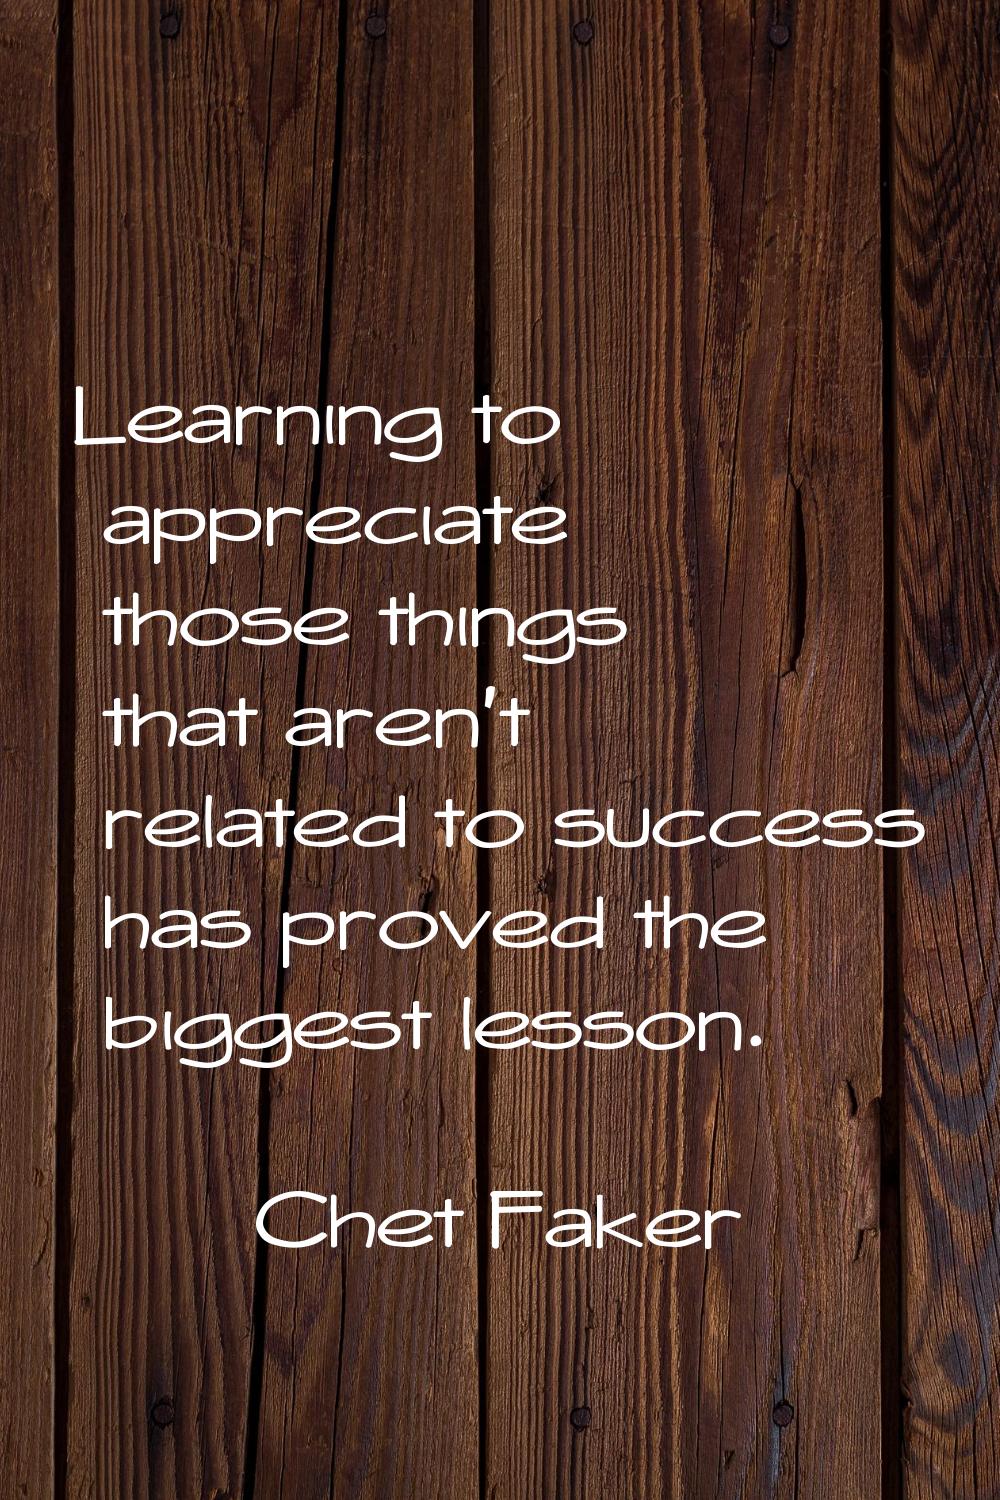 Learning to appreciate those things that aren't related to success has proved the biggest lesson.